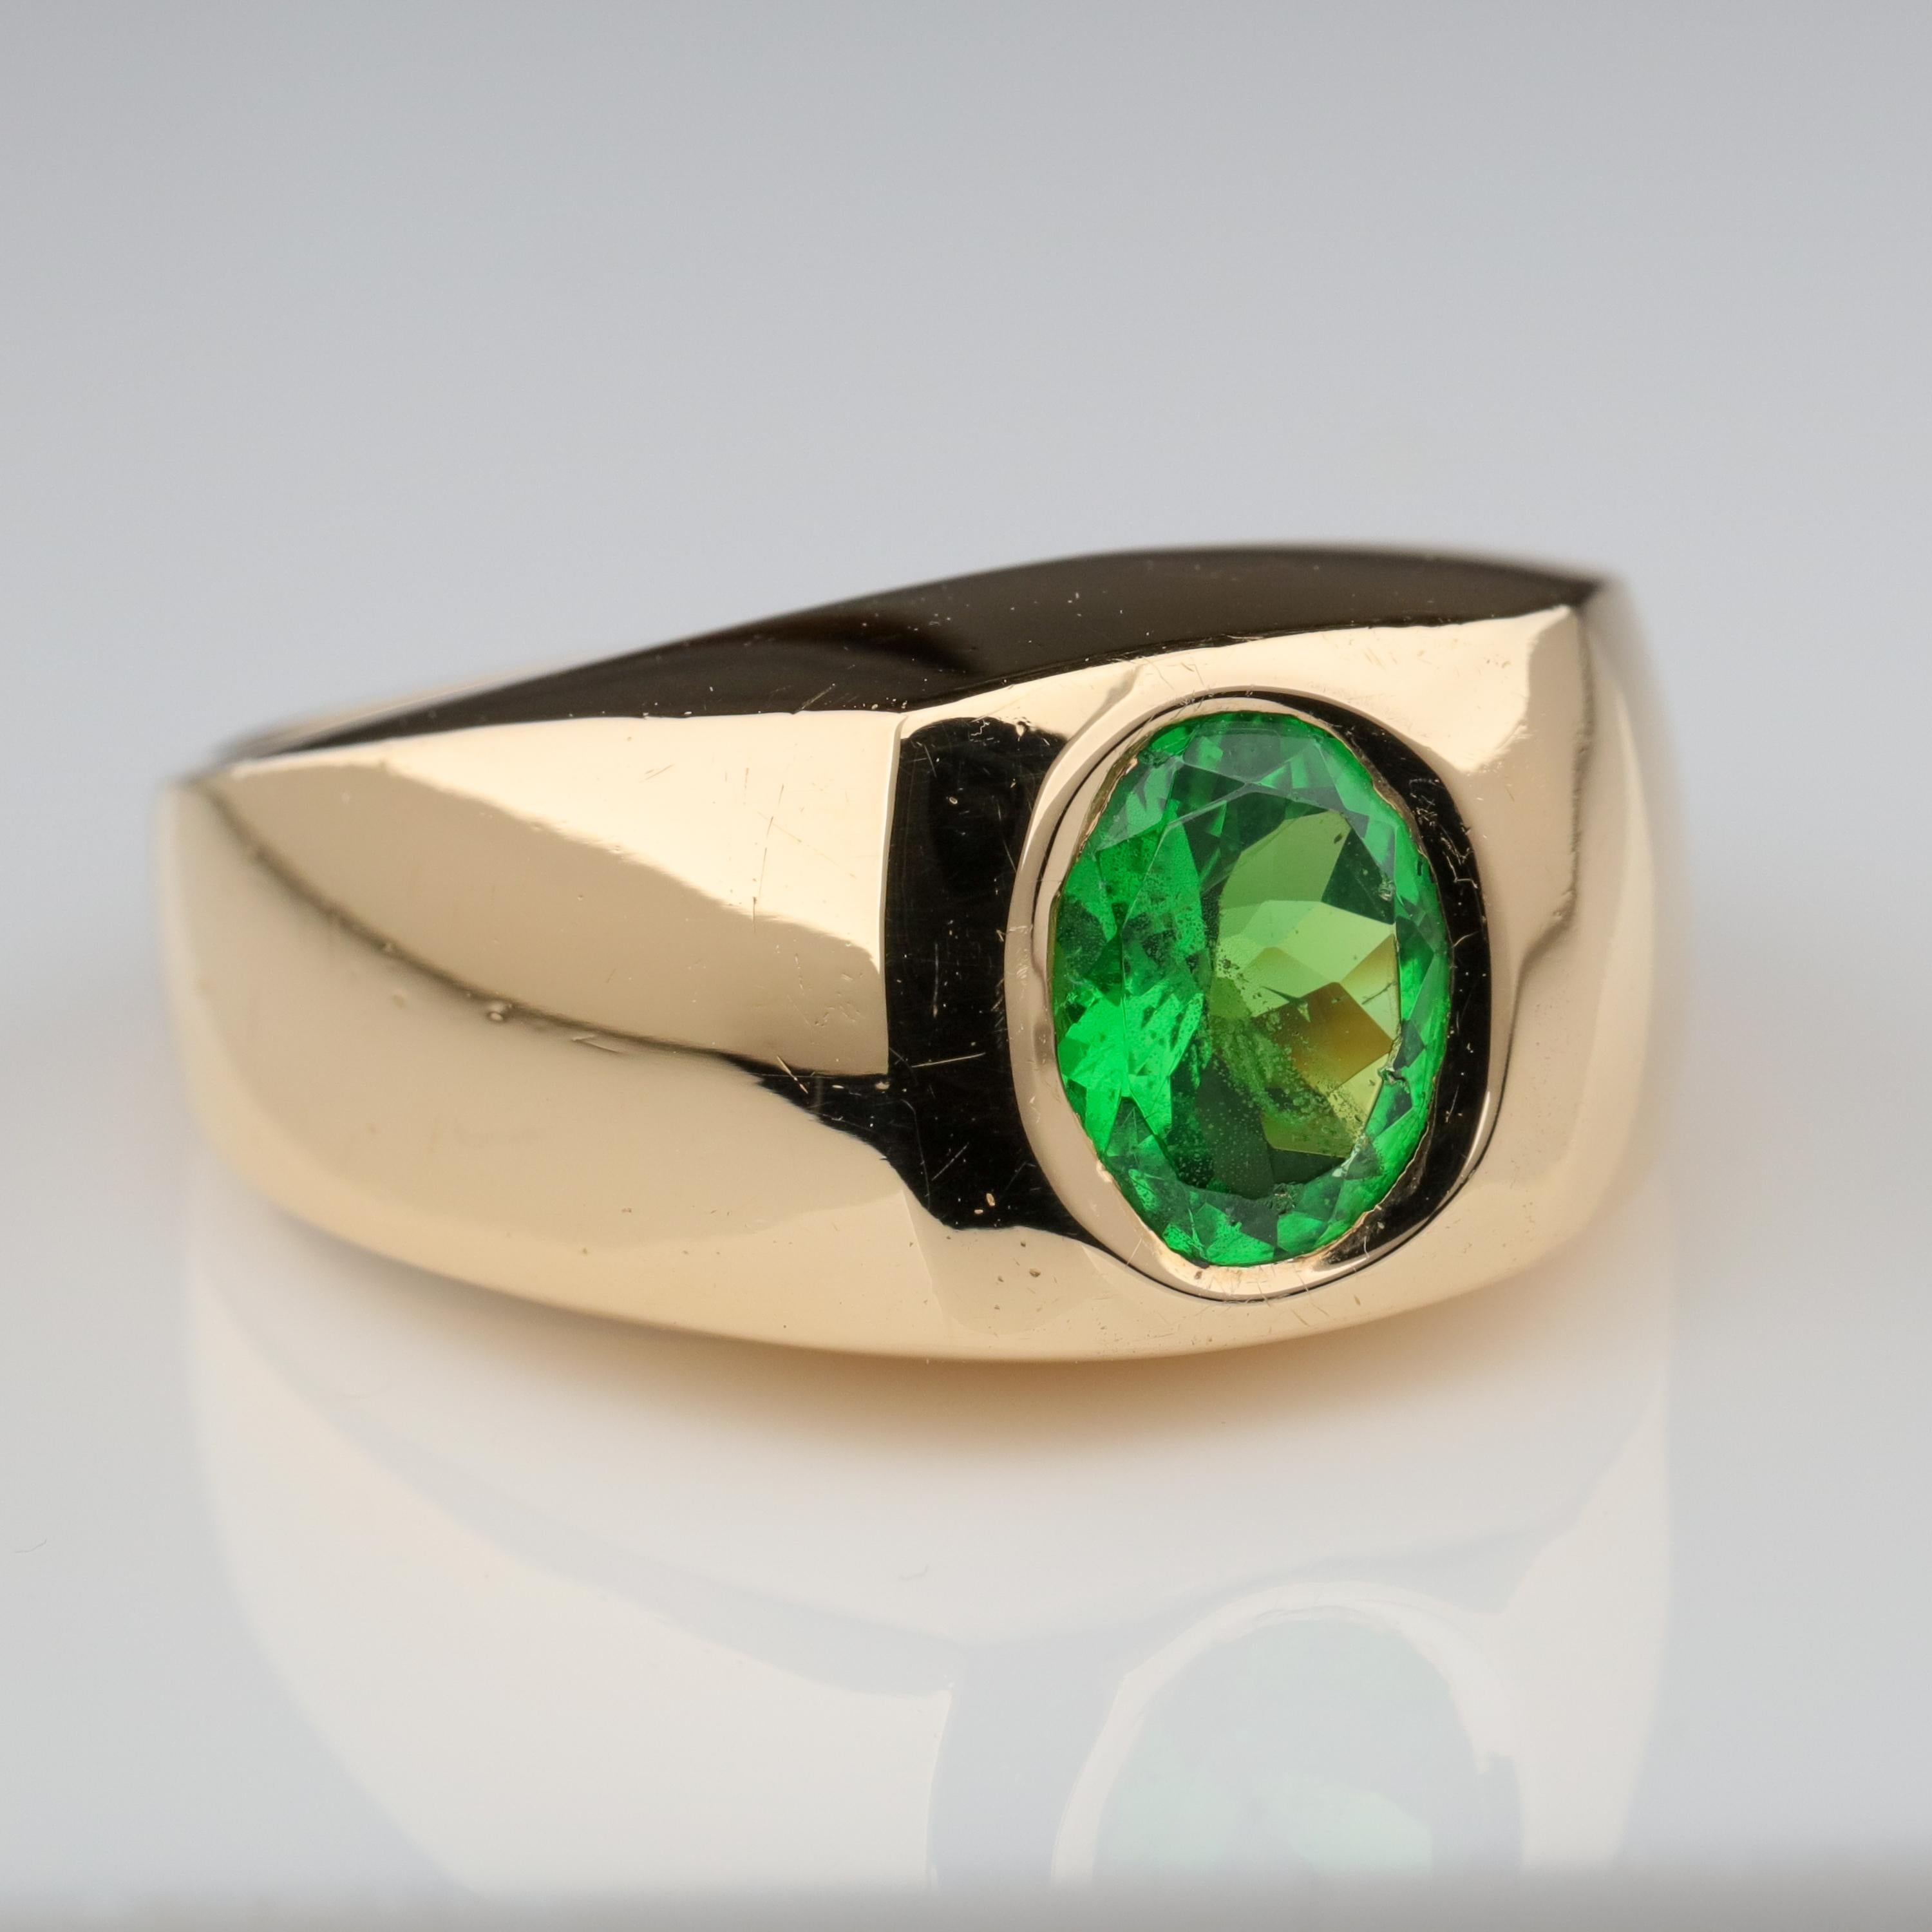 Tsavorite is a rare, vivid-green variety of garnet found in very few places in the world. Its lush vivid green is reminiscent of emerald but with a sharper sparkle and more fire. Tsavorite garnets of two or more carats are very rare things, indeed.